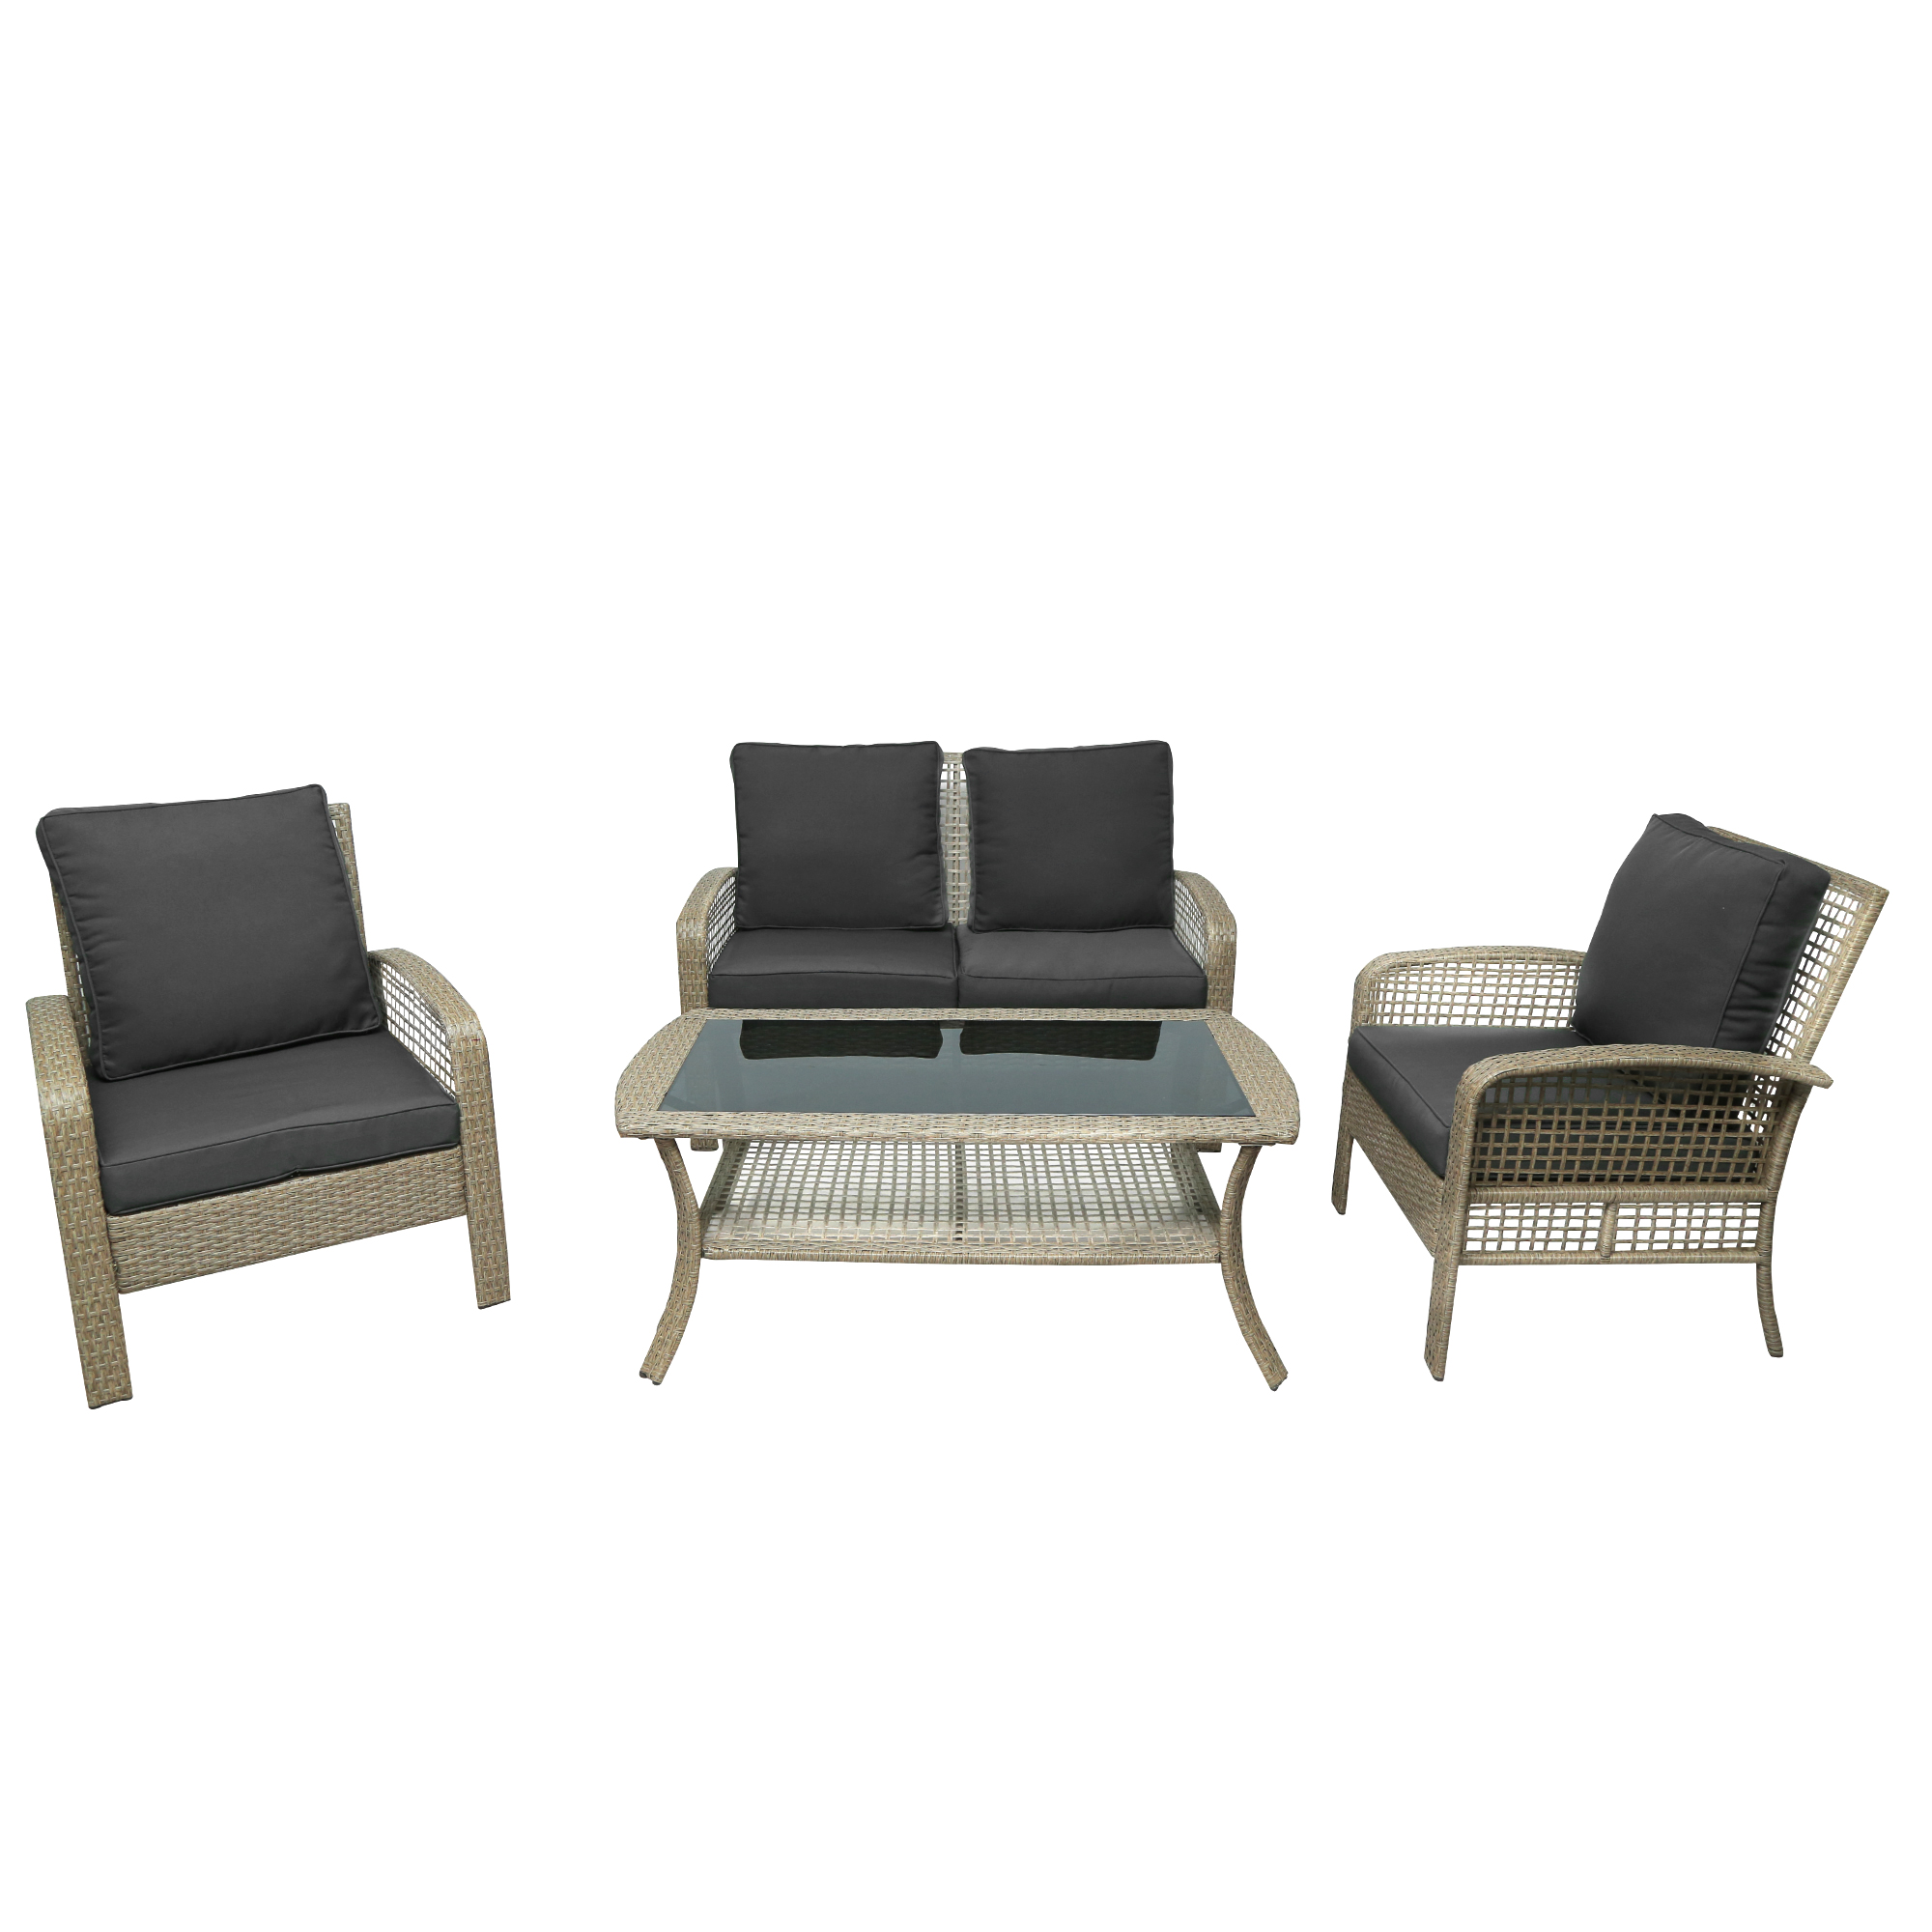 4 Pcs Patio Conversation Sets, PE Rattan Patio Set, Outdoor Bistro Set with Table and Washable Cushions, Patio Porch Sunroom Furniture Set for Garden Poolside Balcony, JA2370 - image 4 of 8